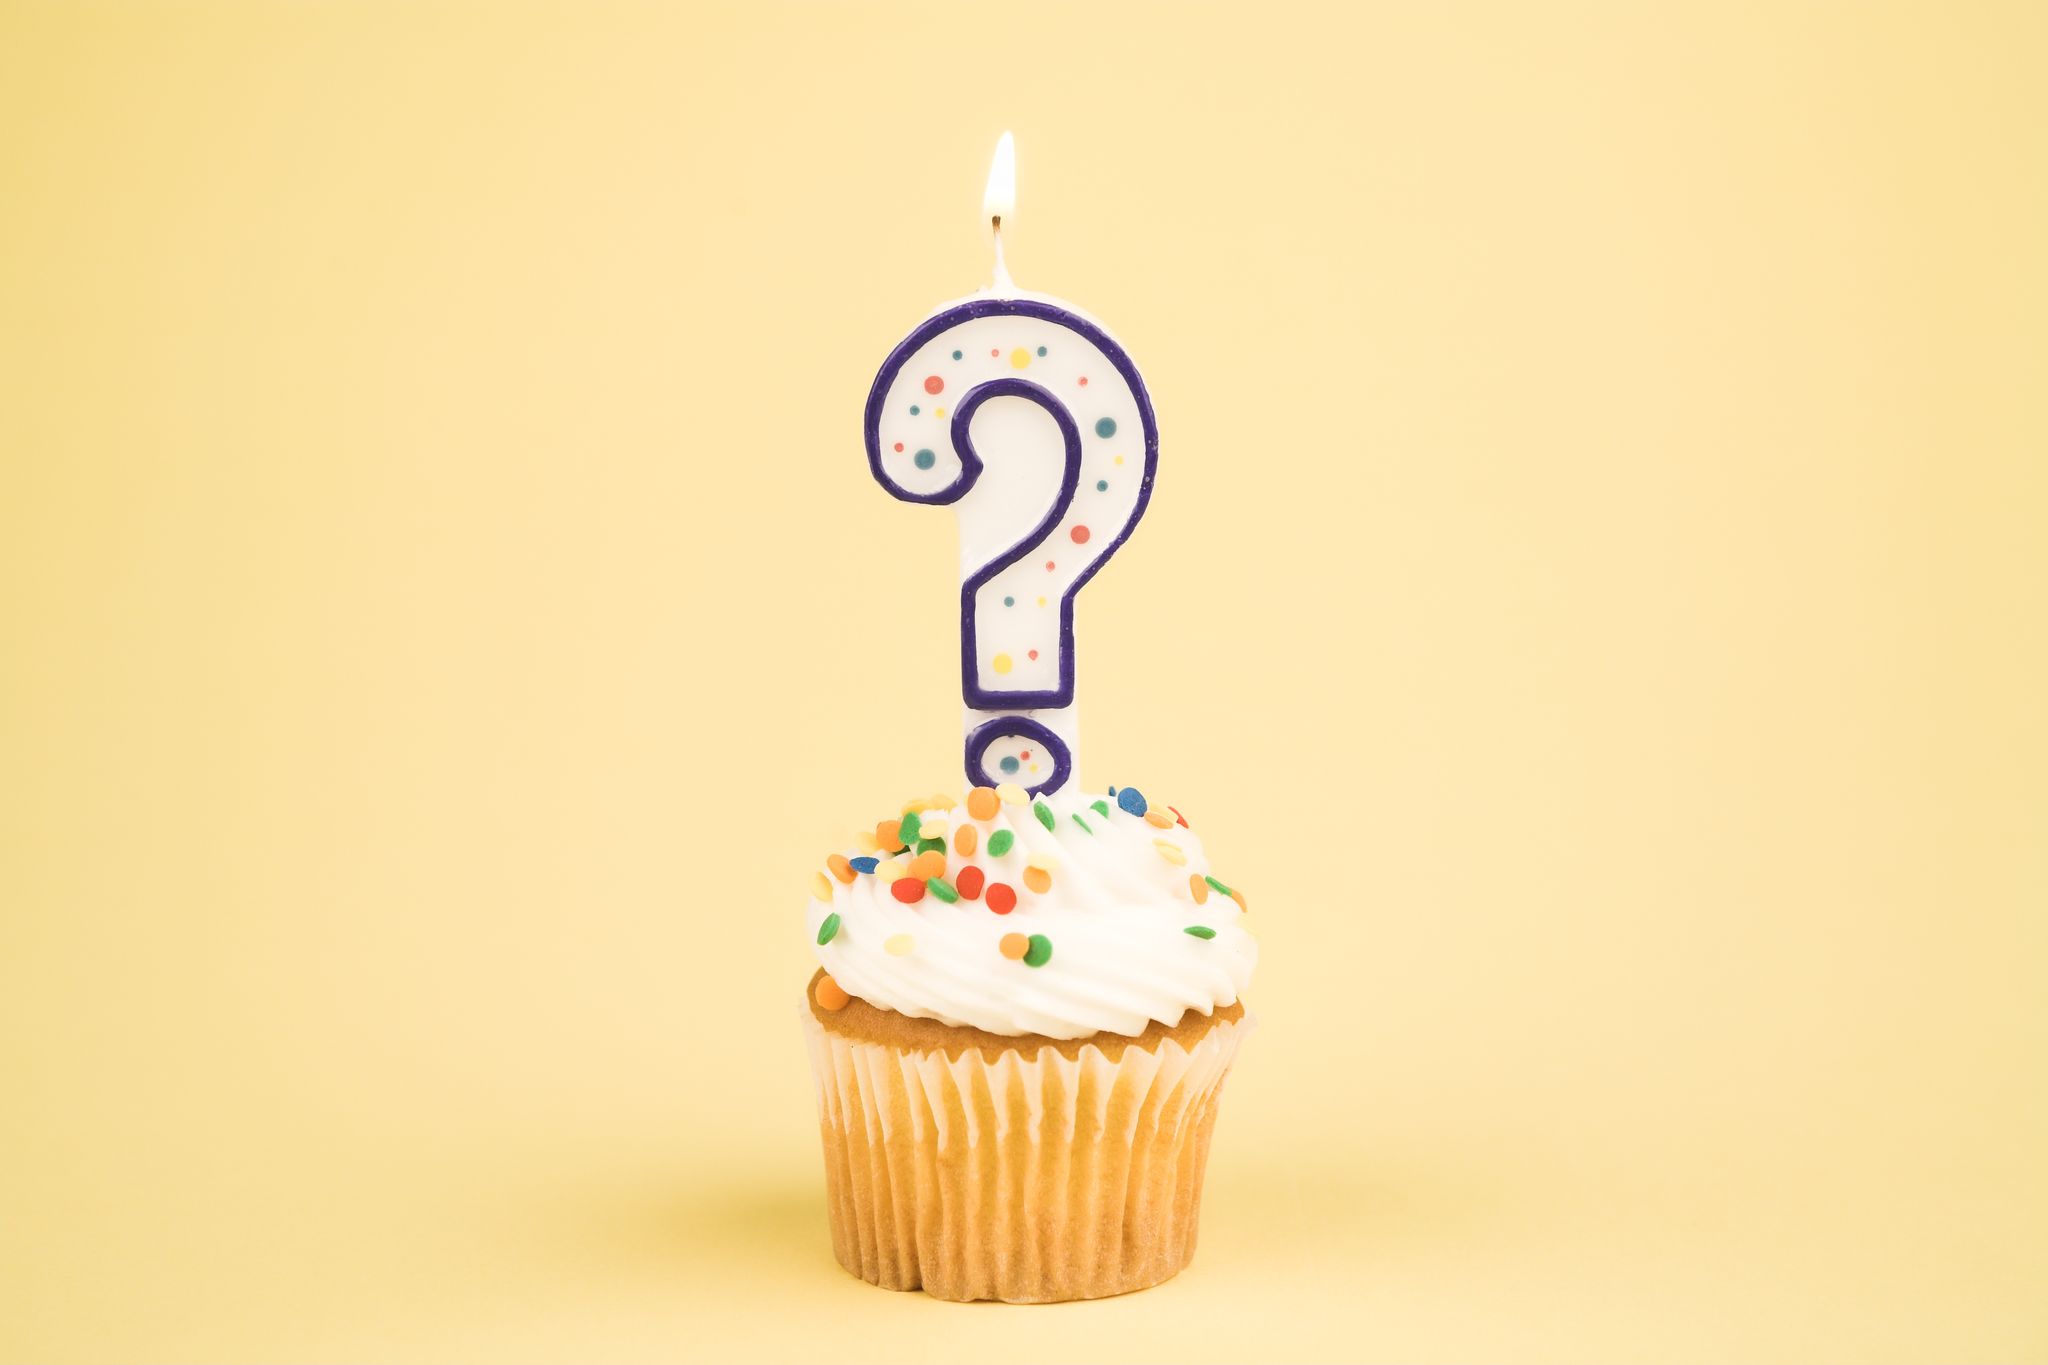 question mark birthday candle on cupcake